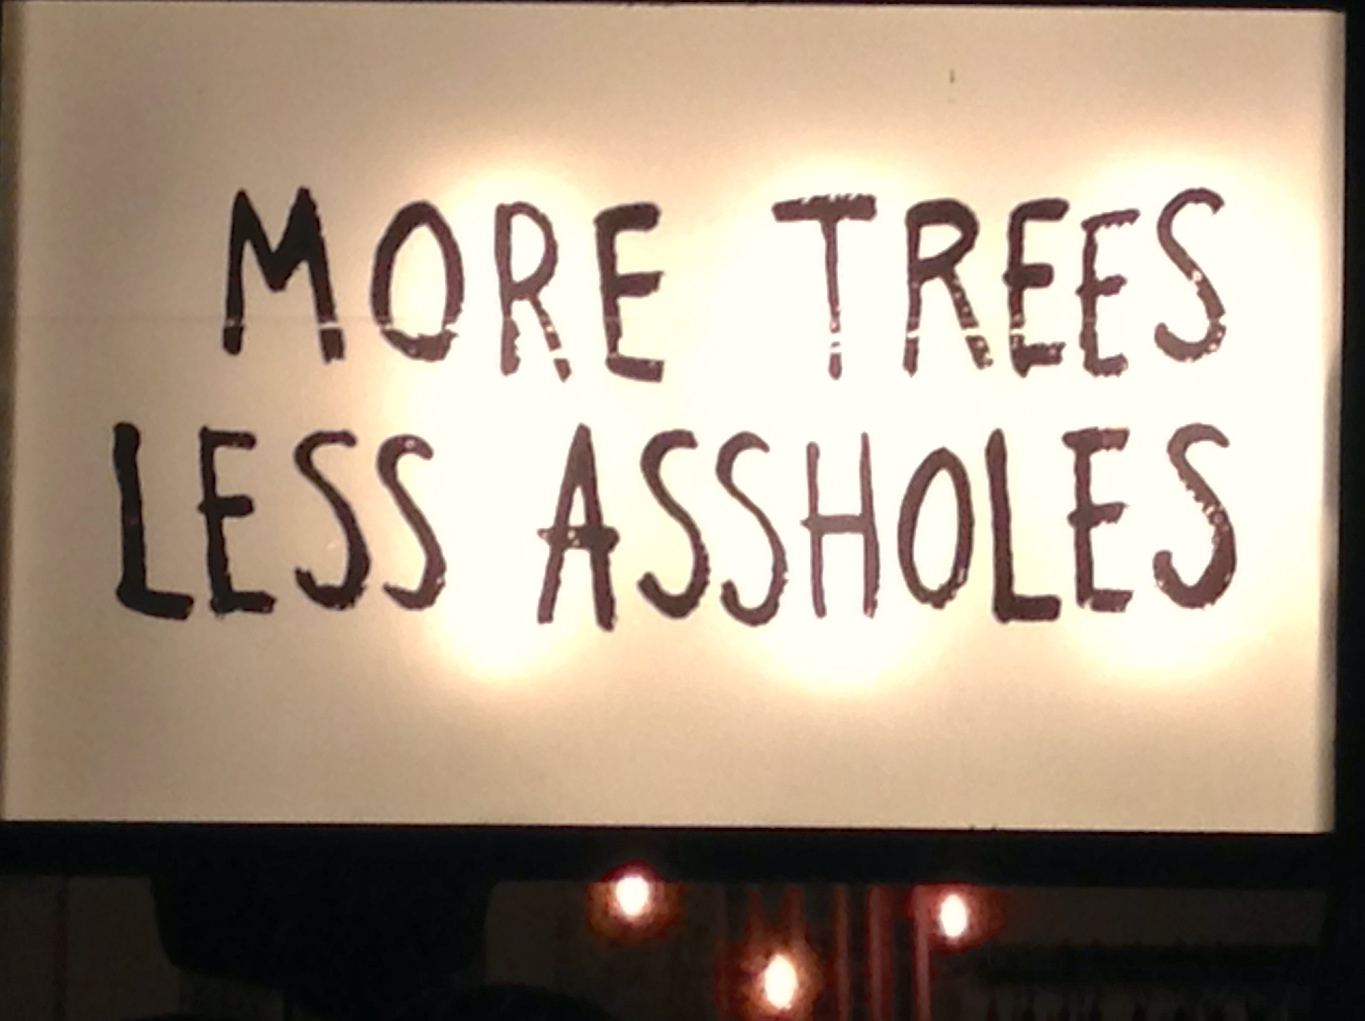 More Tress Much less A**holes